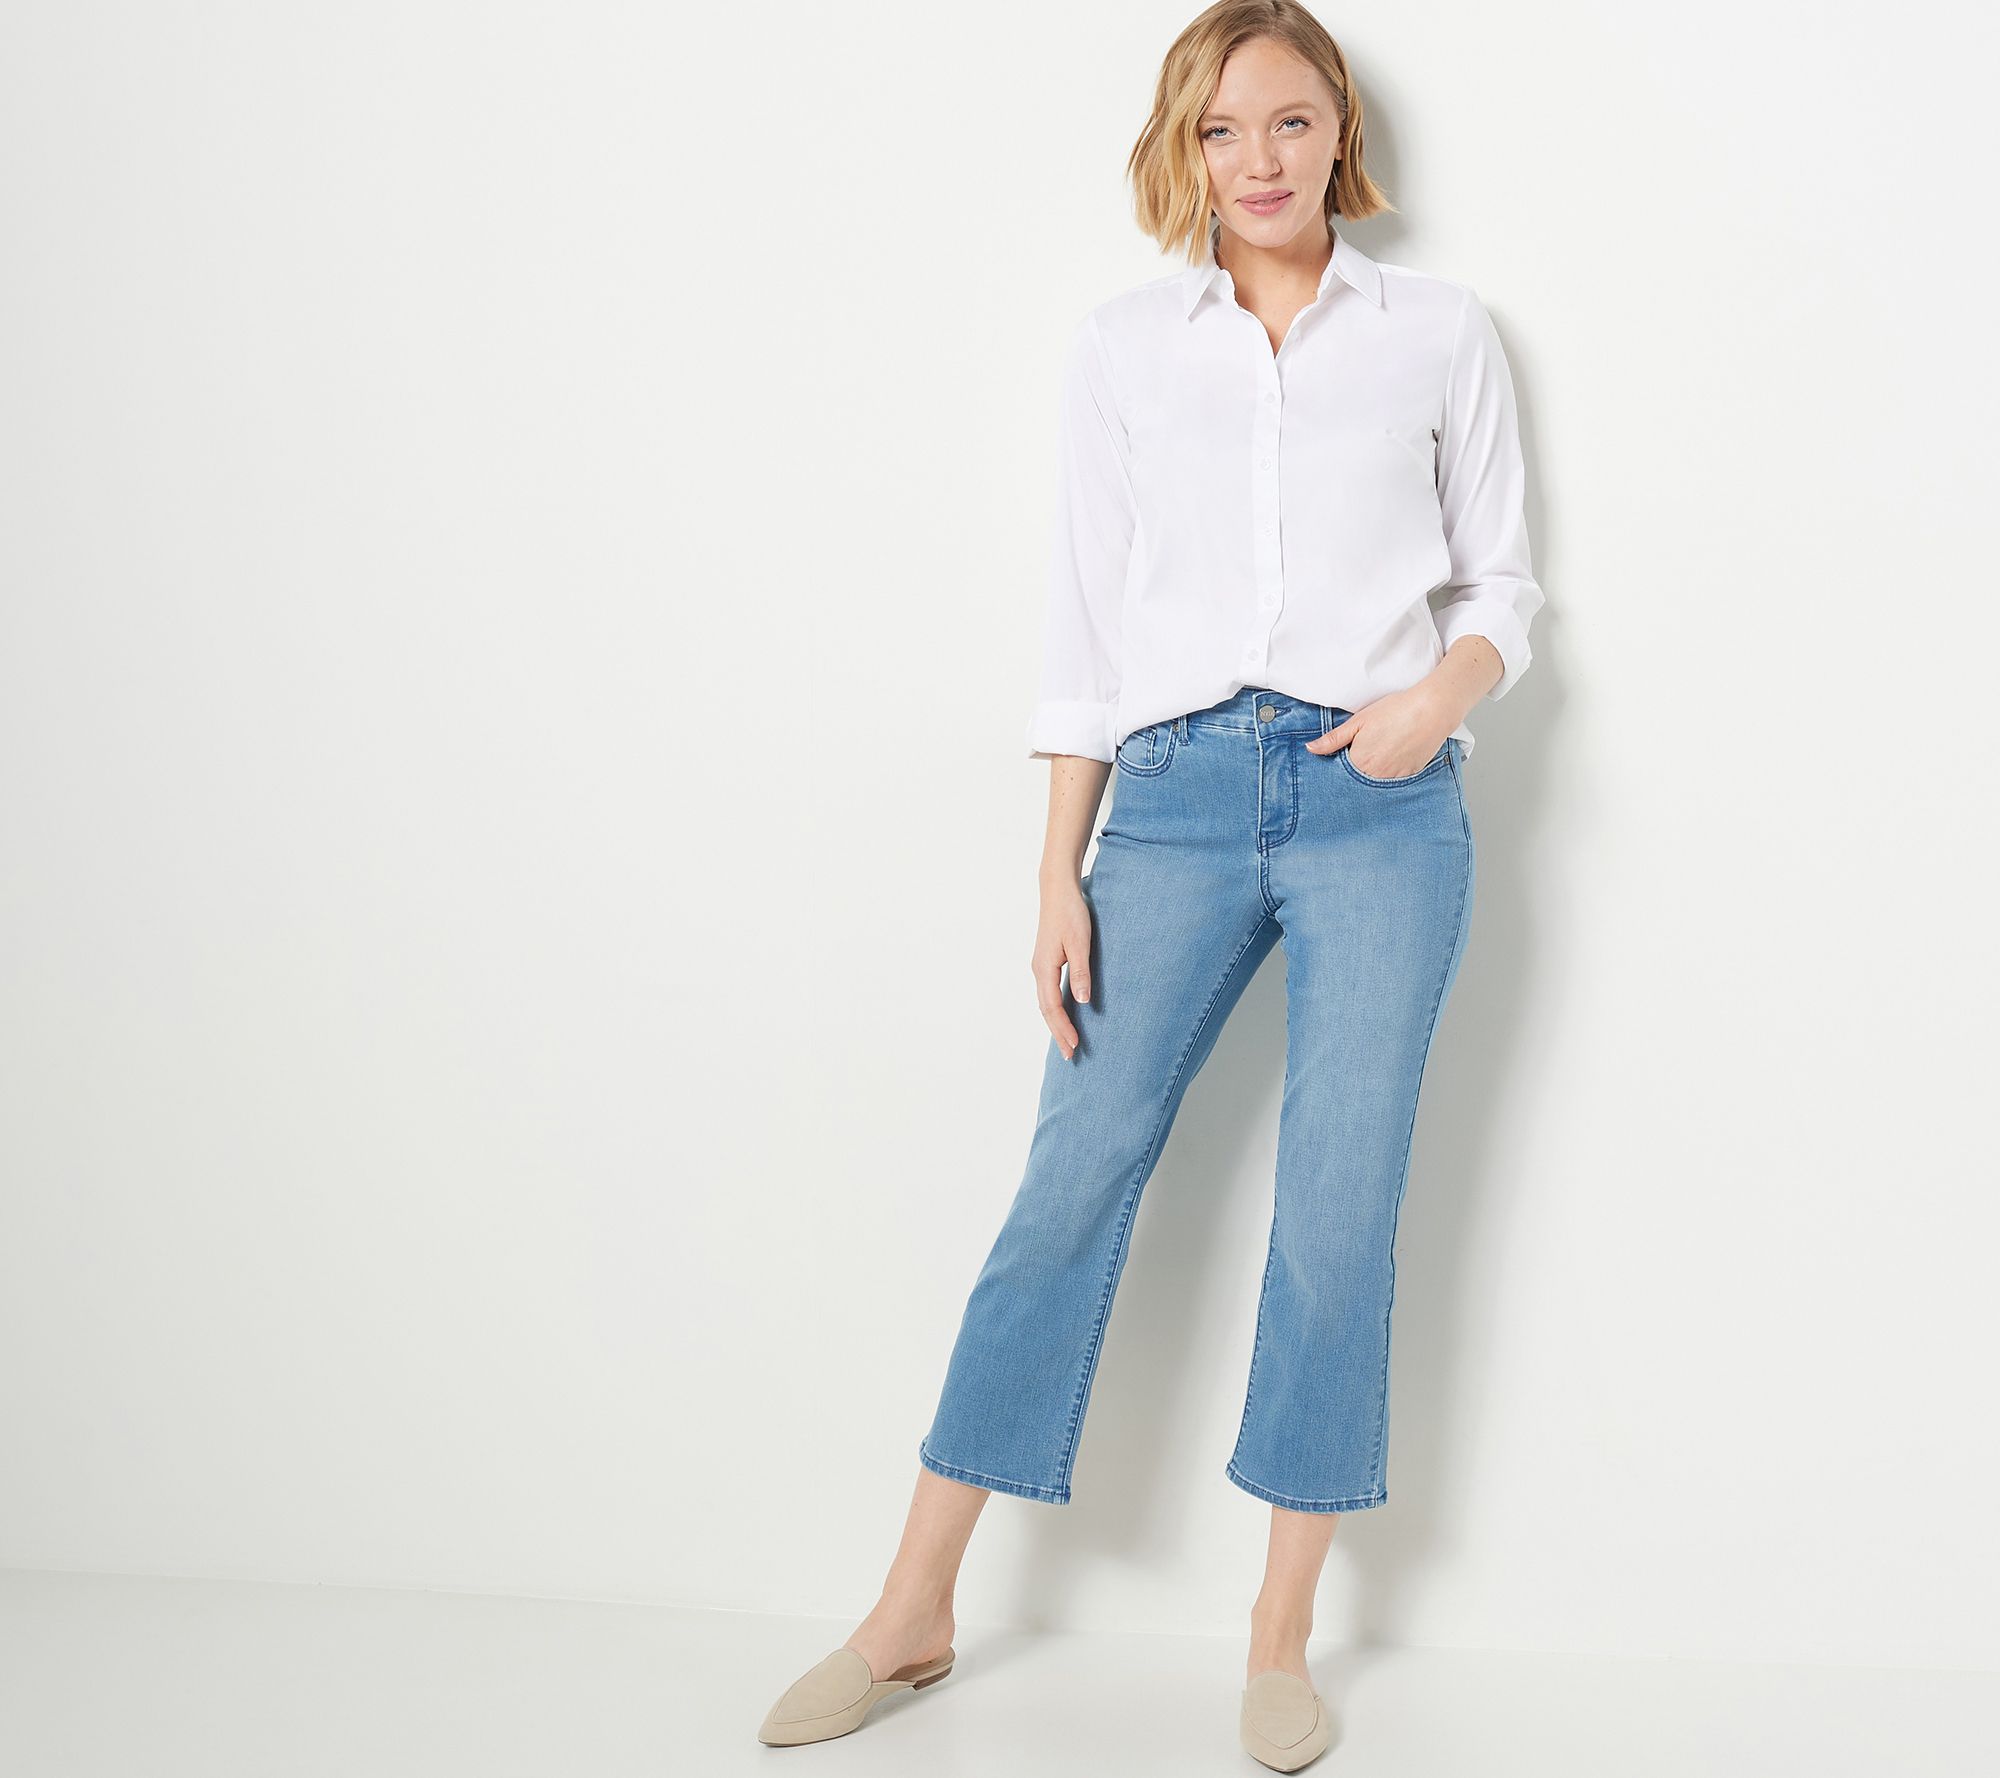 NYDJ Marilyn Straight Crop Jeans in Cool Embrace - Elodie - QVC.com